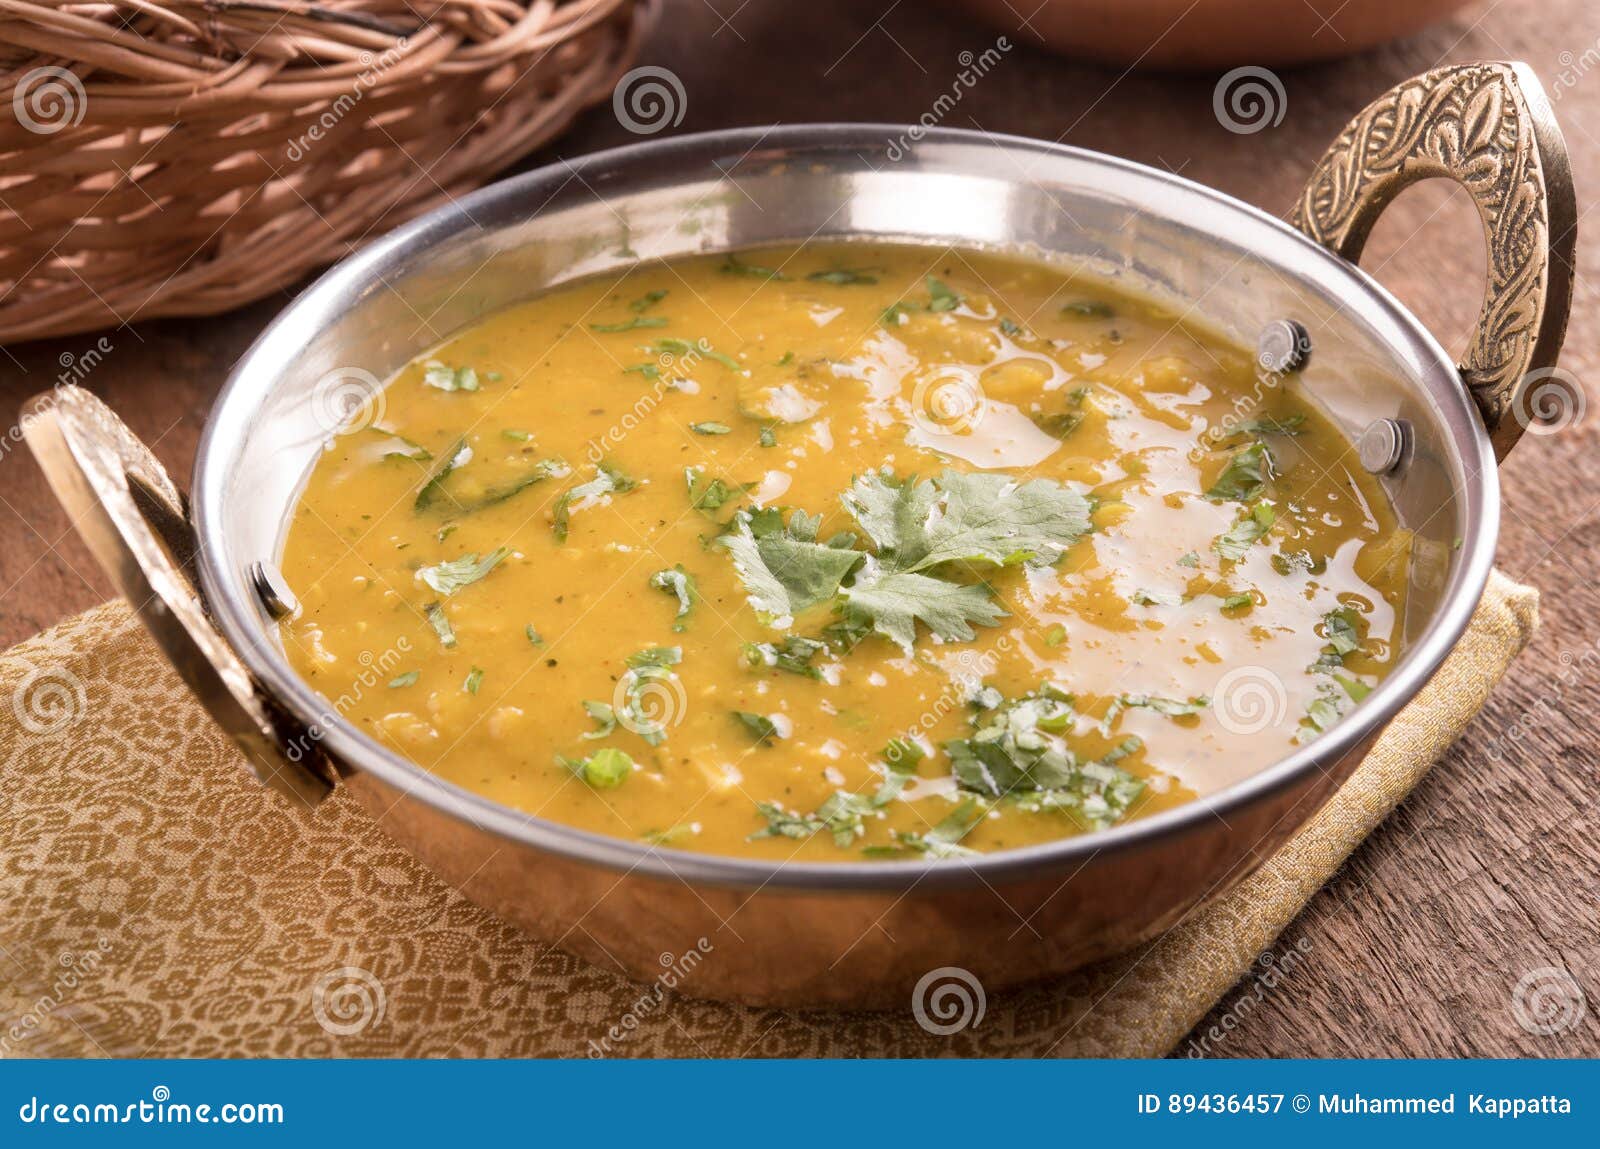 dal curry on wooden background